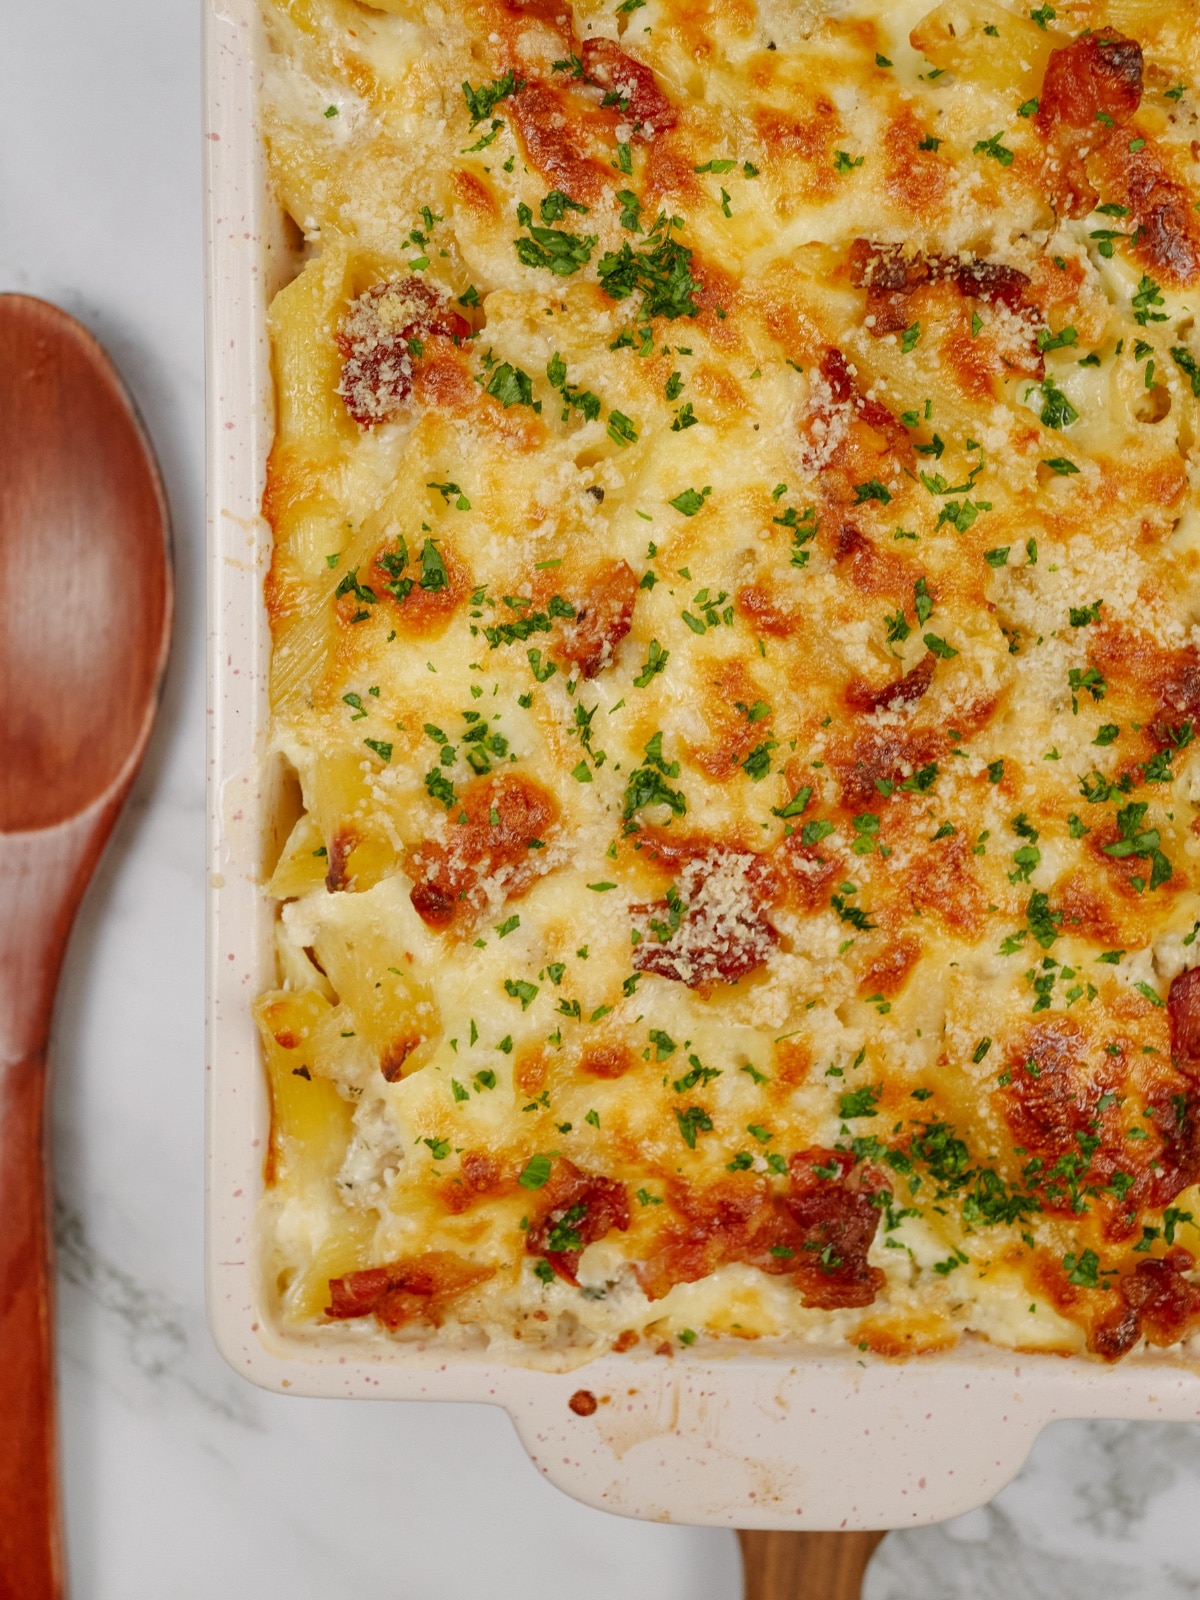 Chicken bacon ranch casserole baked in a dish and topped with bacon pieces and chopped parsley